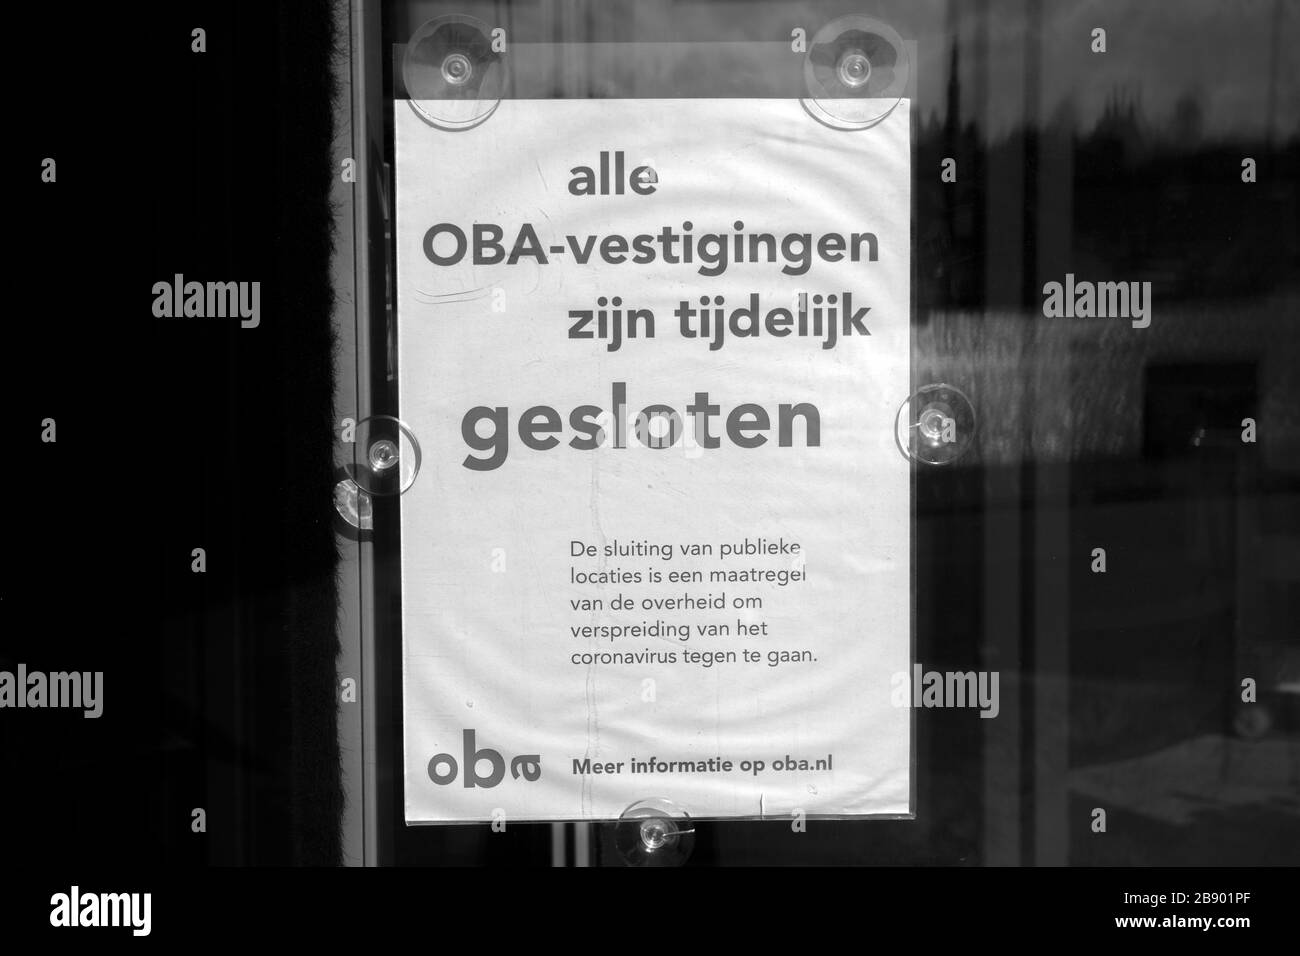 OBA Oosterdok Closed Due To The Due To The Coronavirus At Amsterdam The Netherlands 2020 Stock Photo